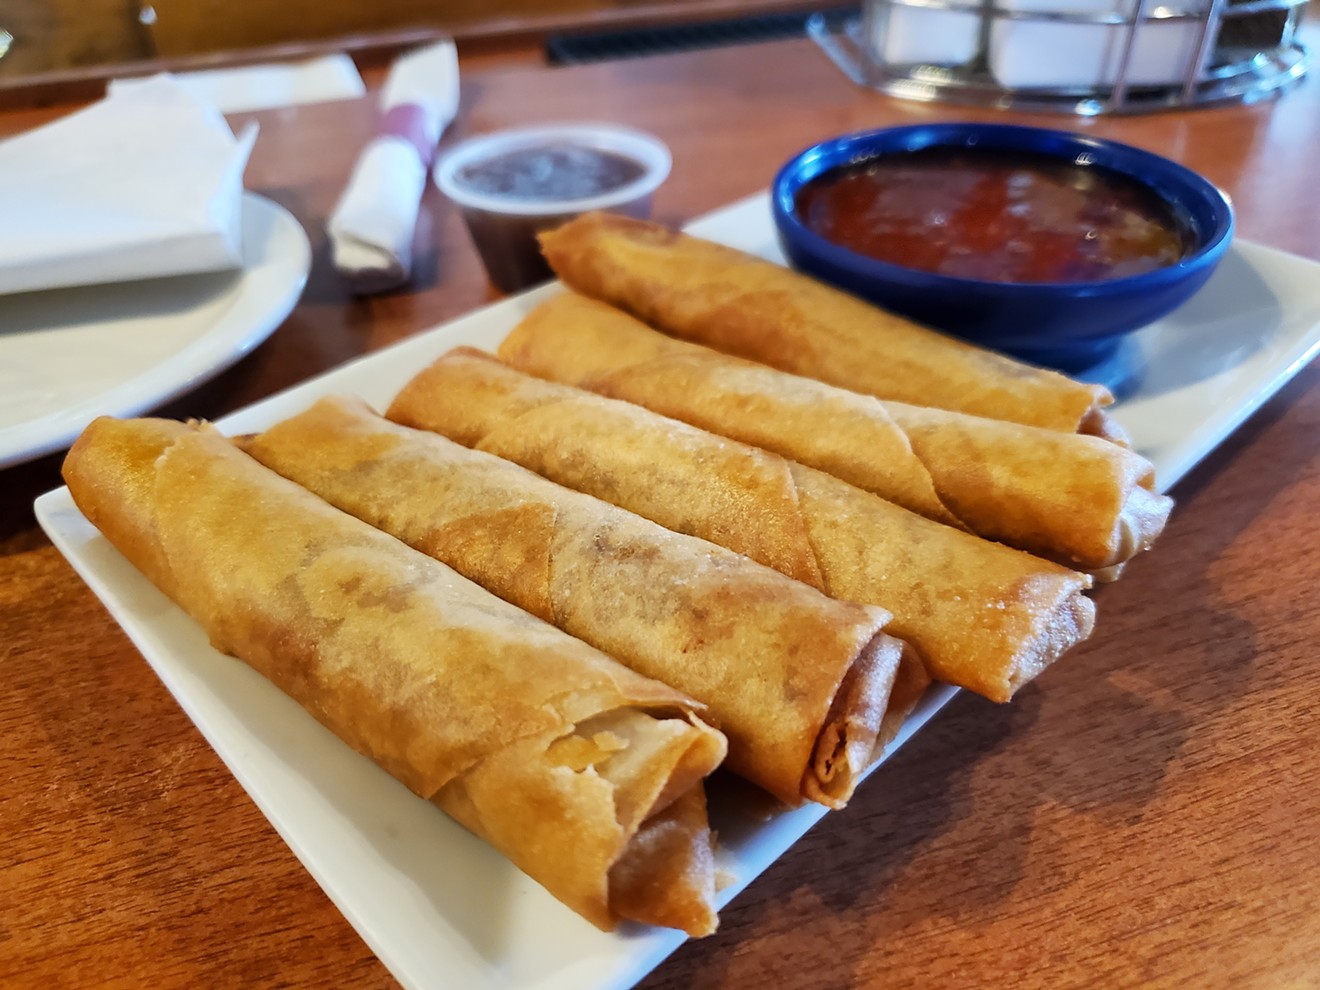 Tutu Rolls are a specialty at Lakewood Grill.